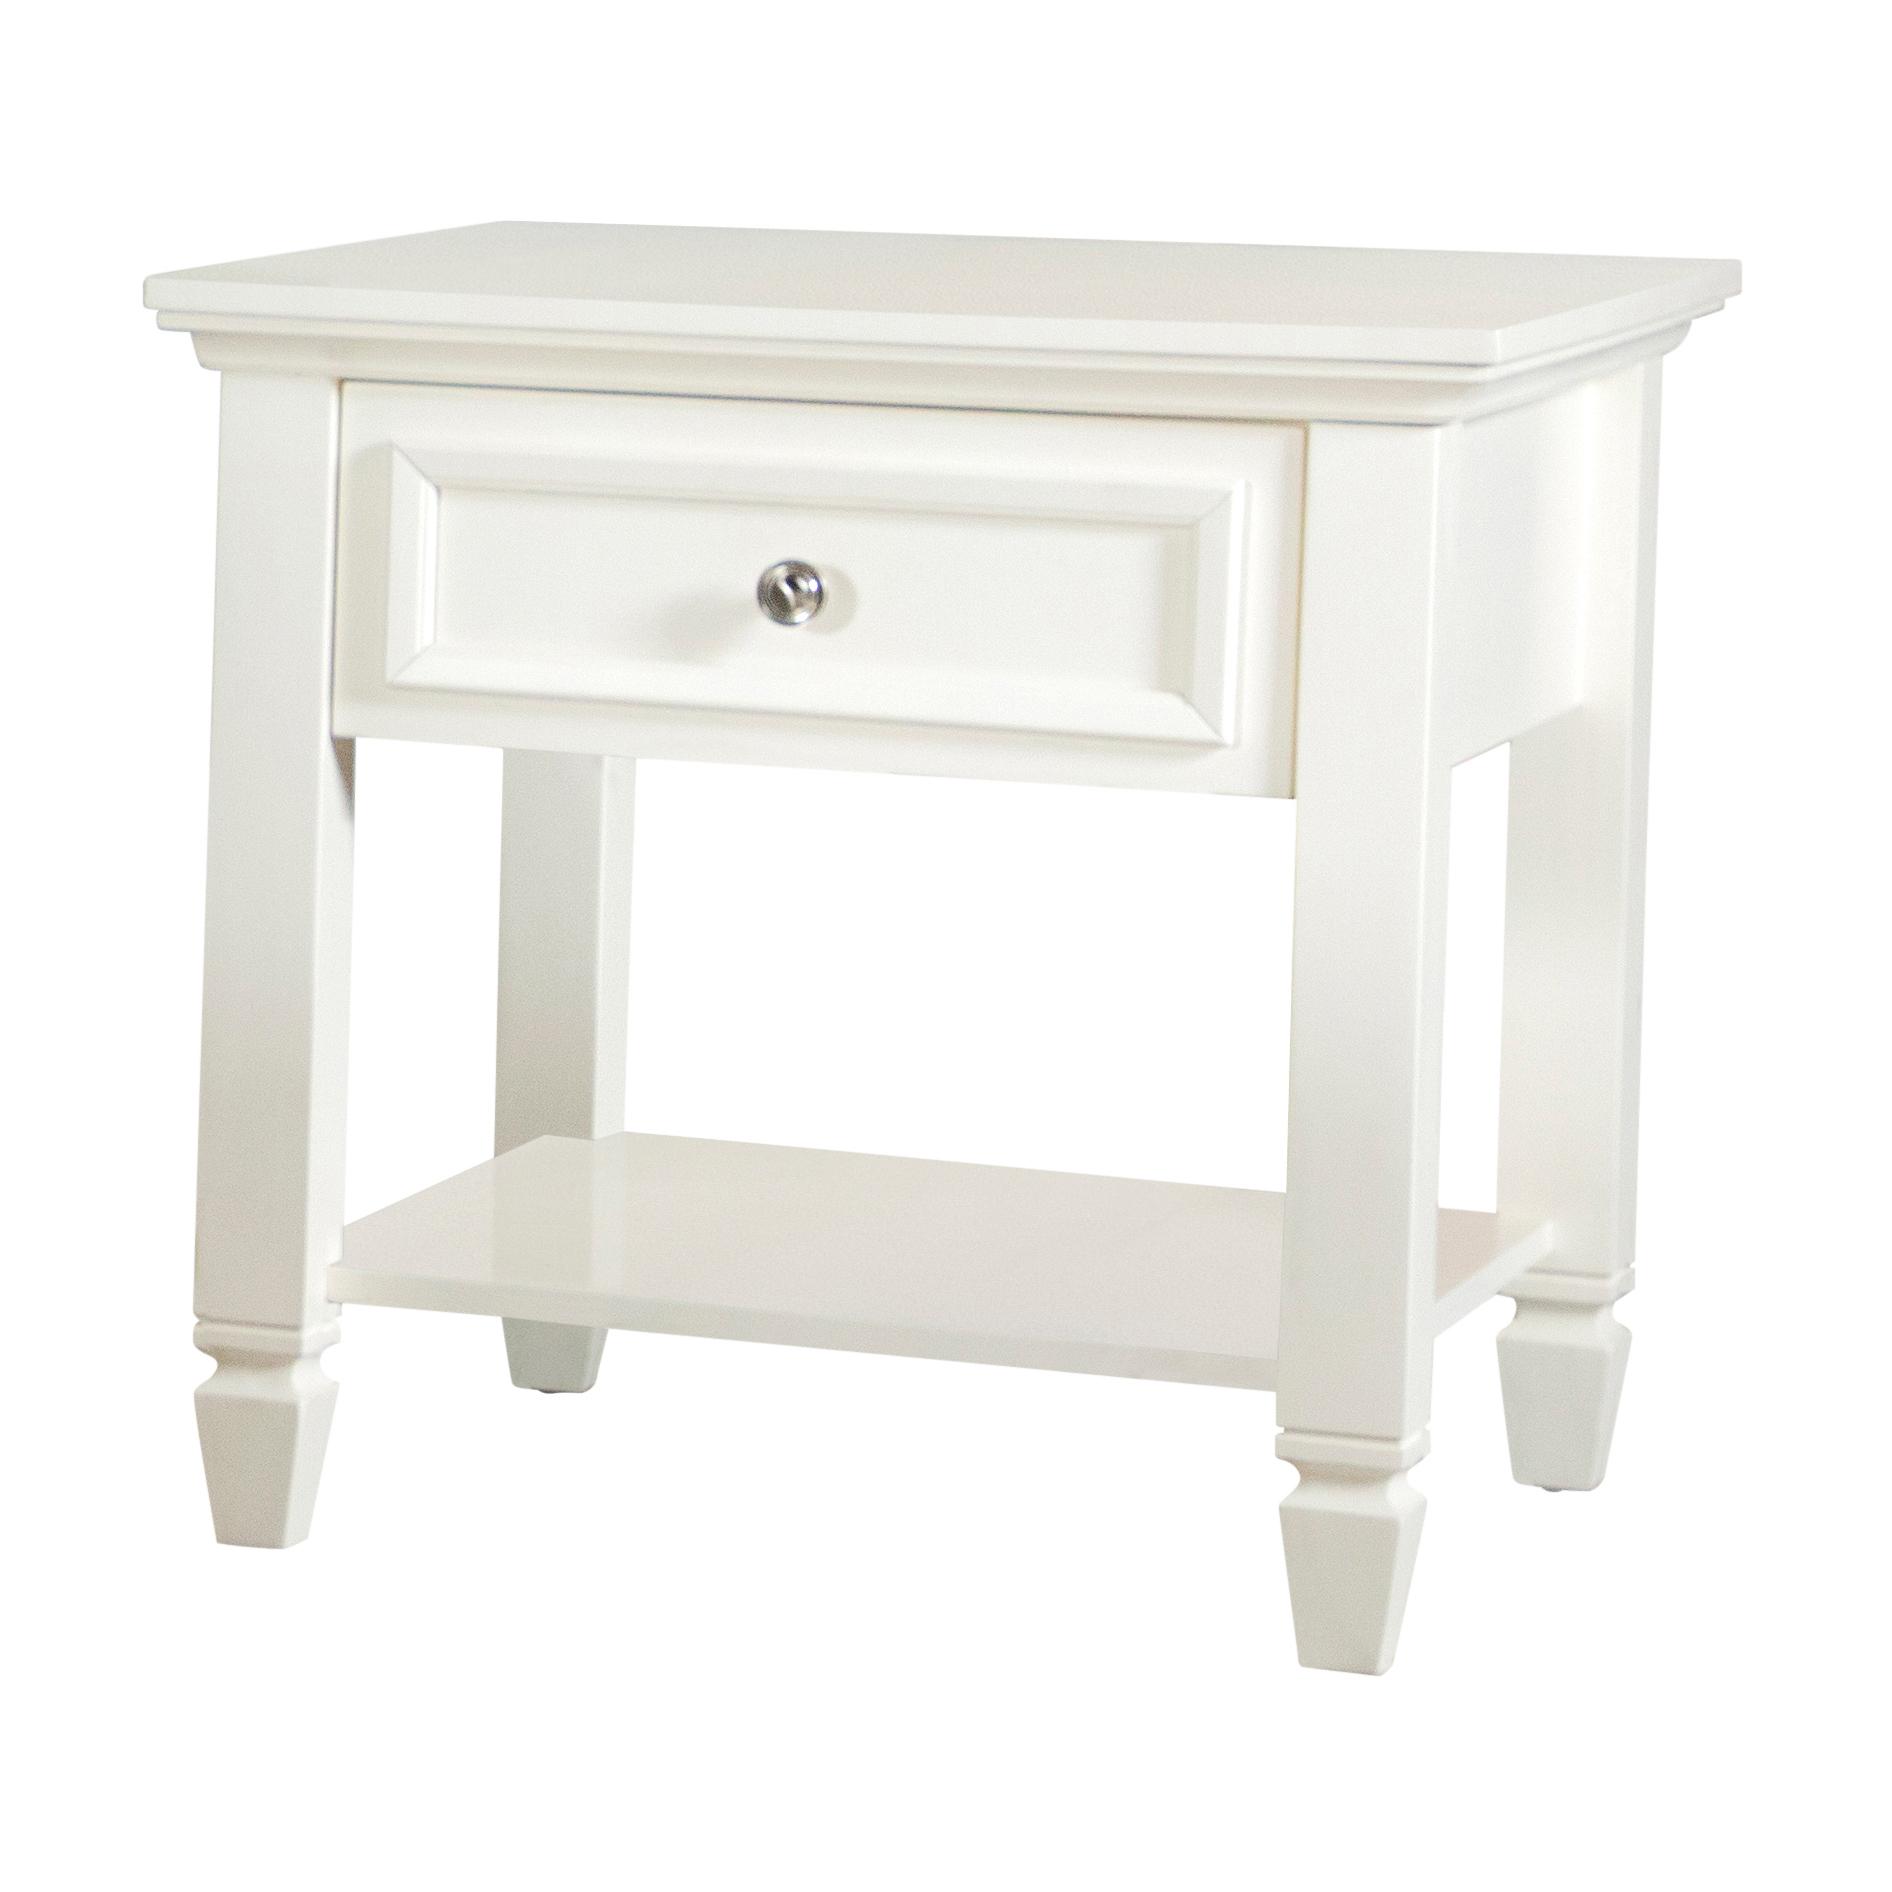 Cottage End Table 753307 753307 in White 